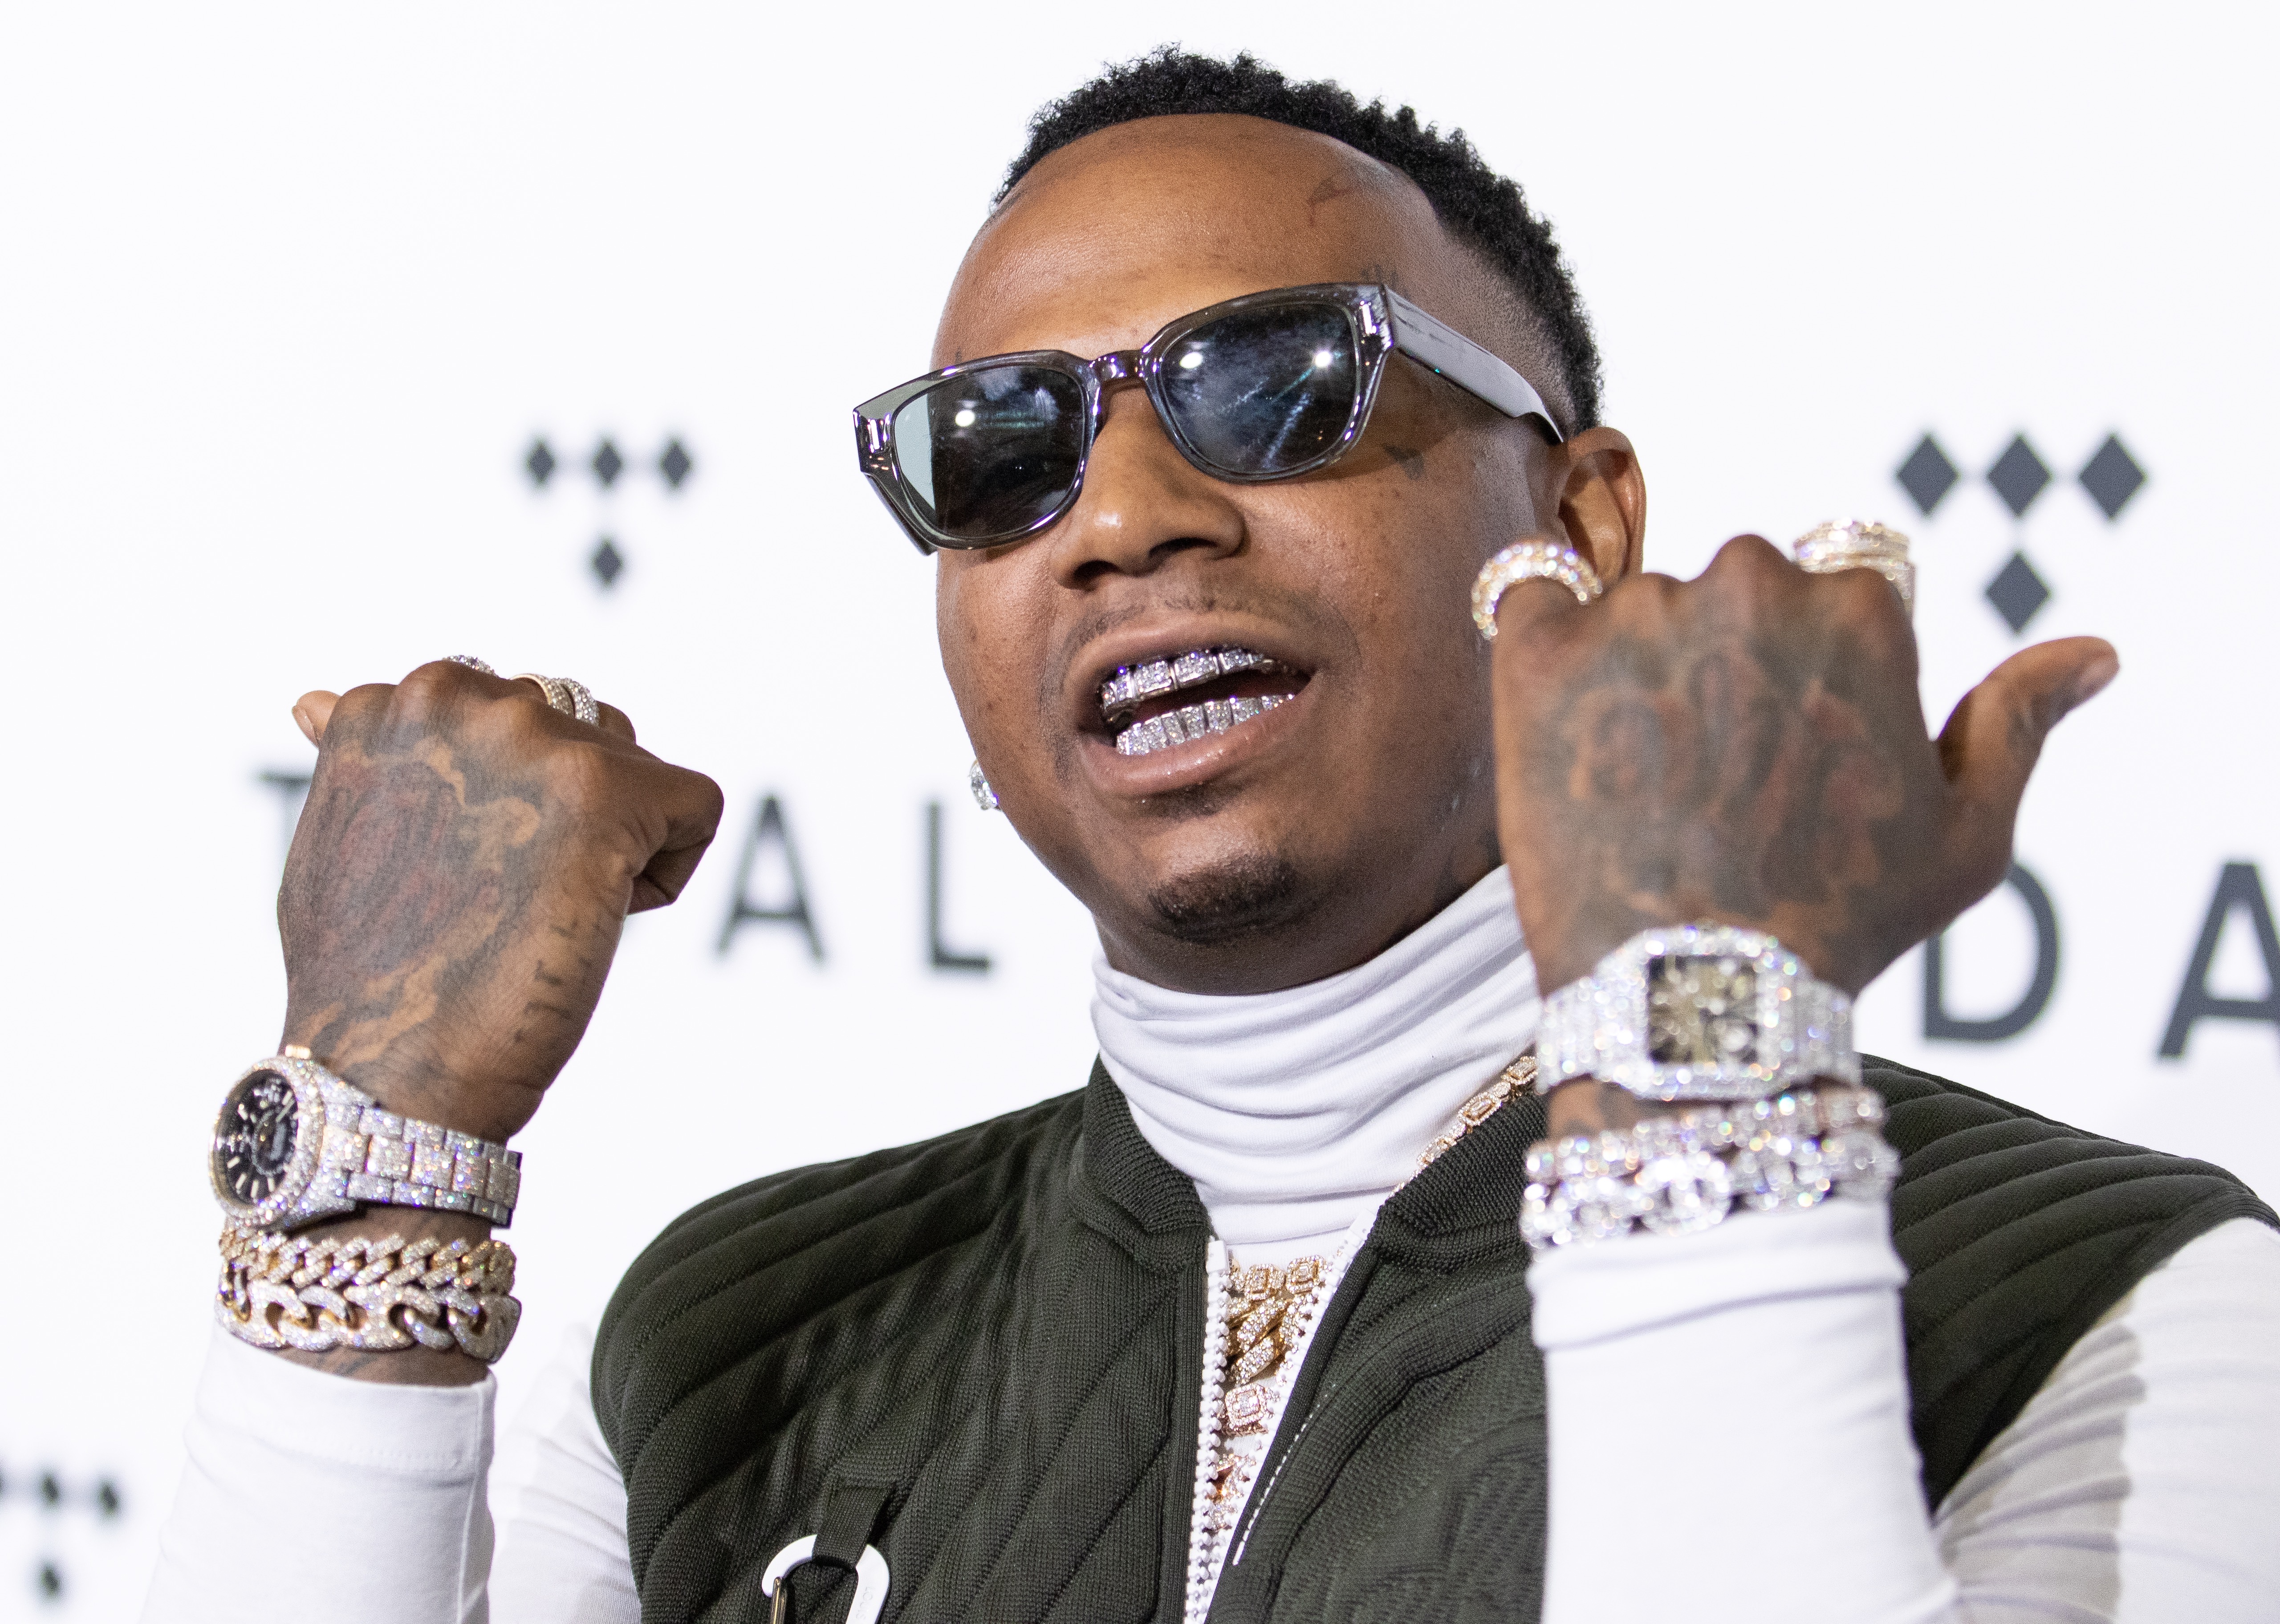 Moneybagg Yo enlists Polo G & Lil Durk for Free Promo